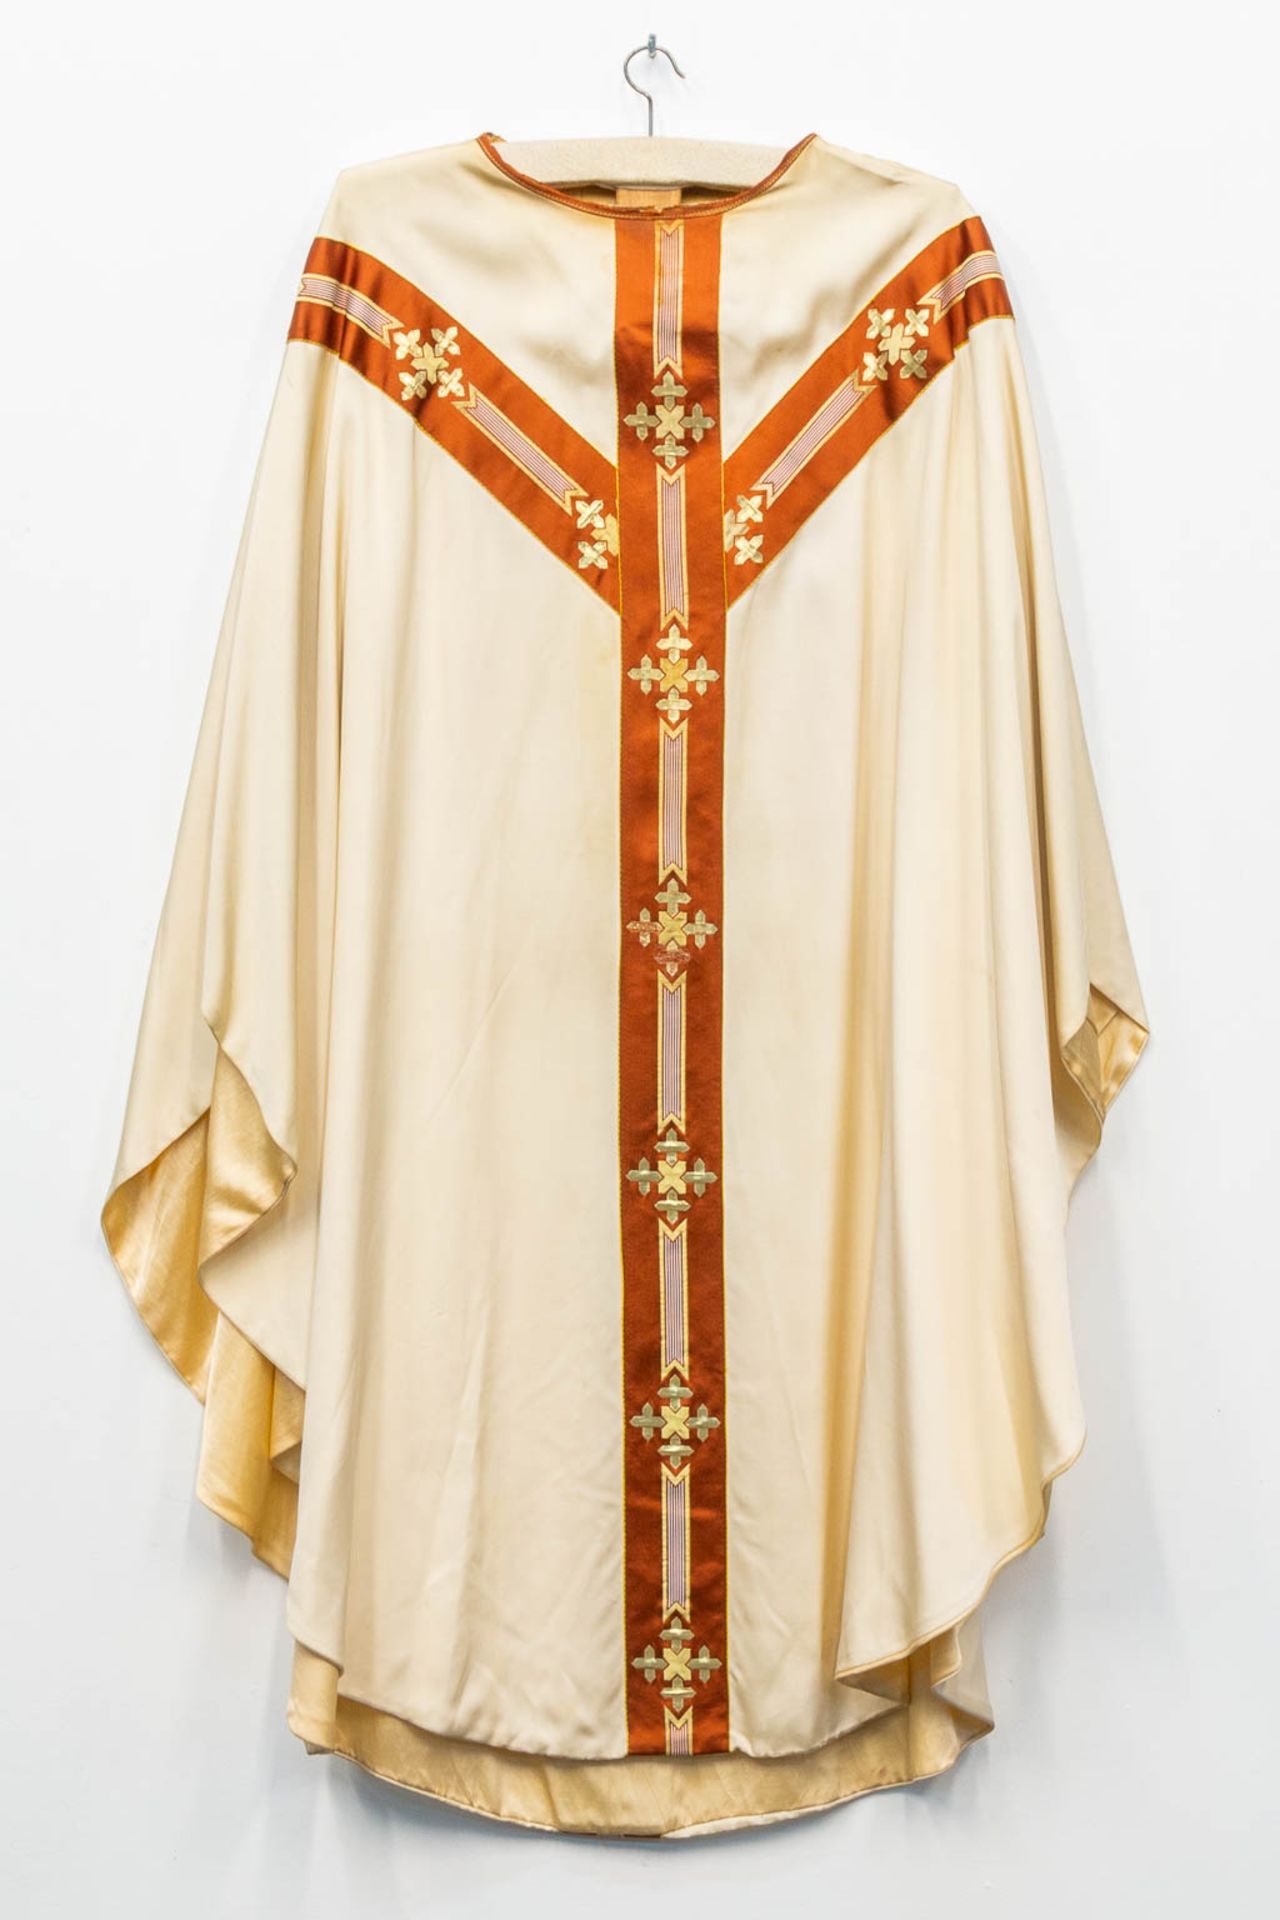 A collection of 4 vintage chasubles, 20th C. - Image 2 of 12